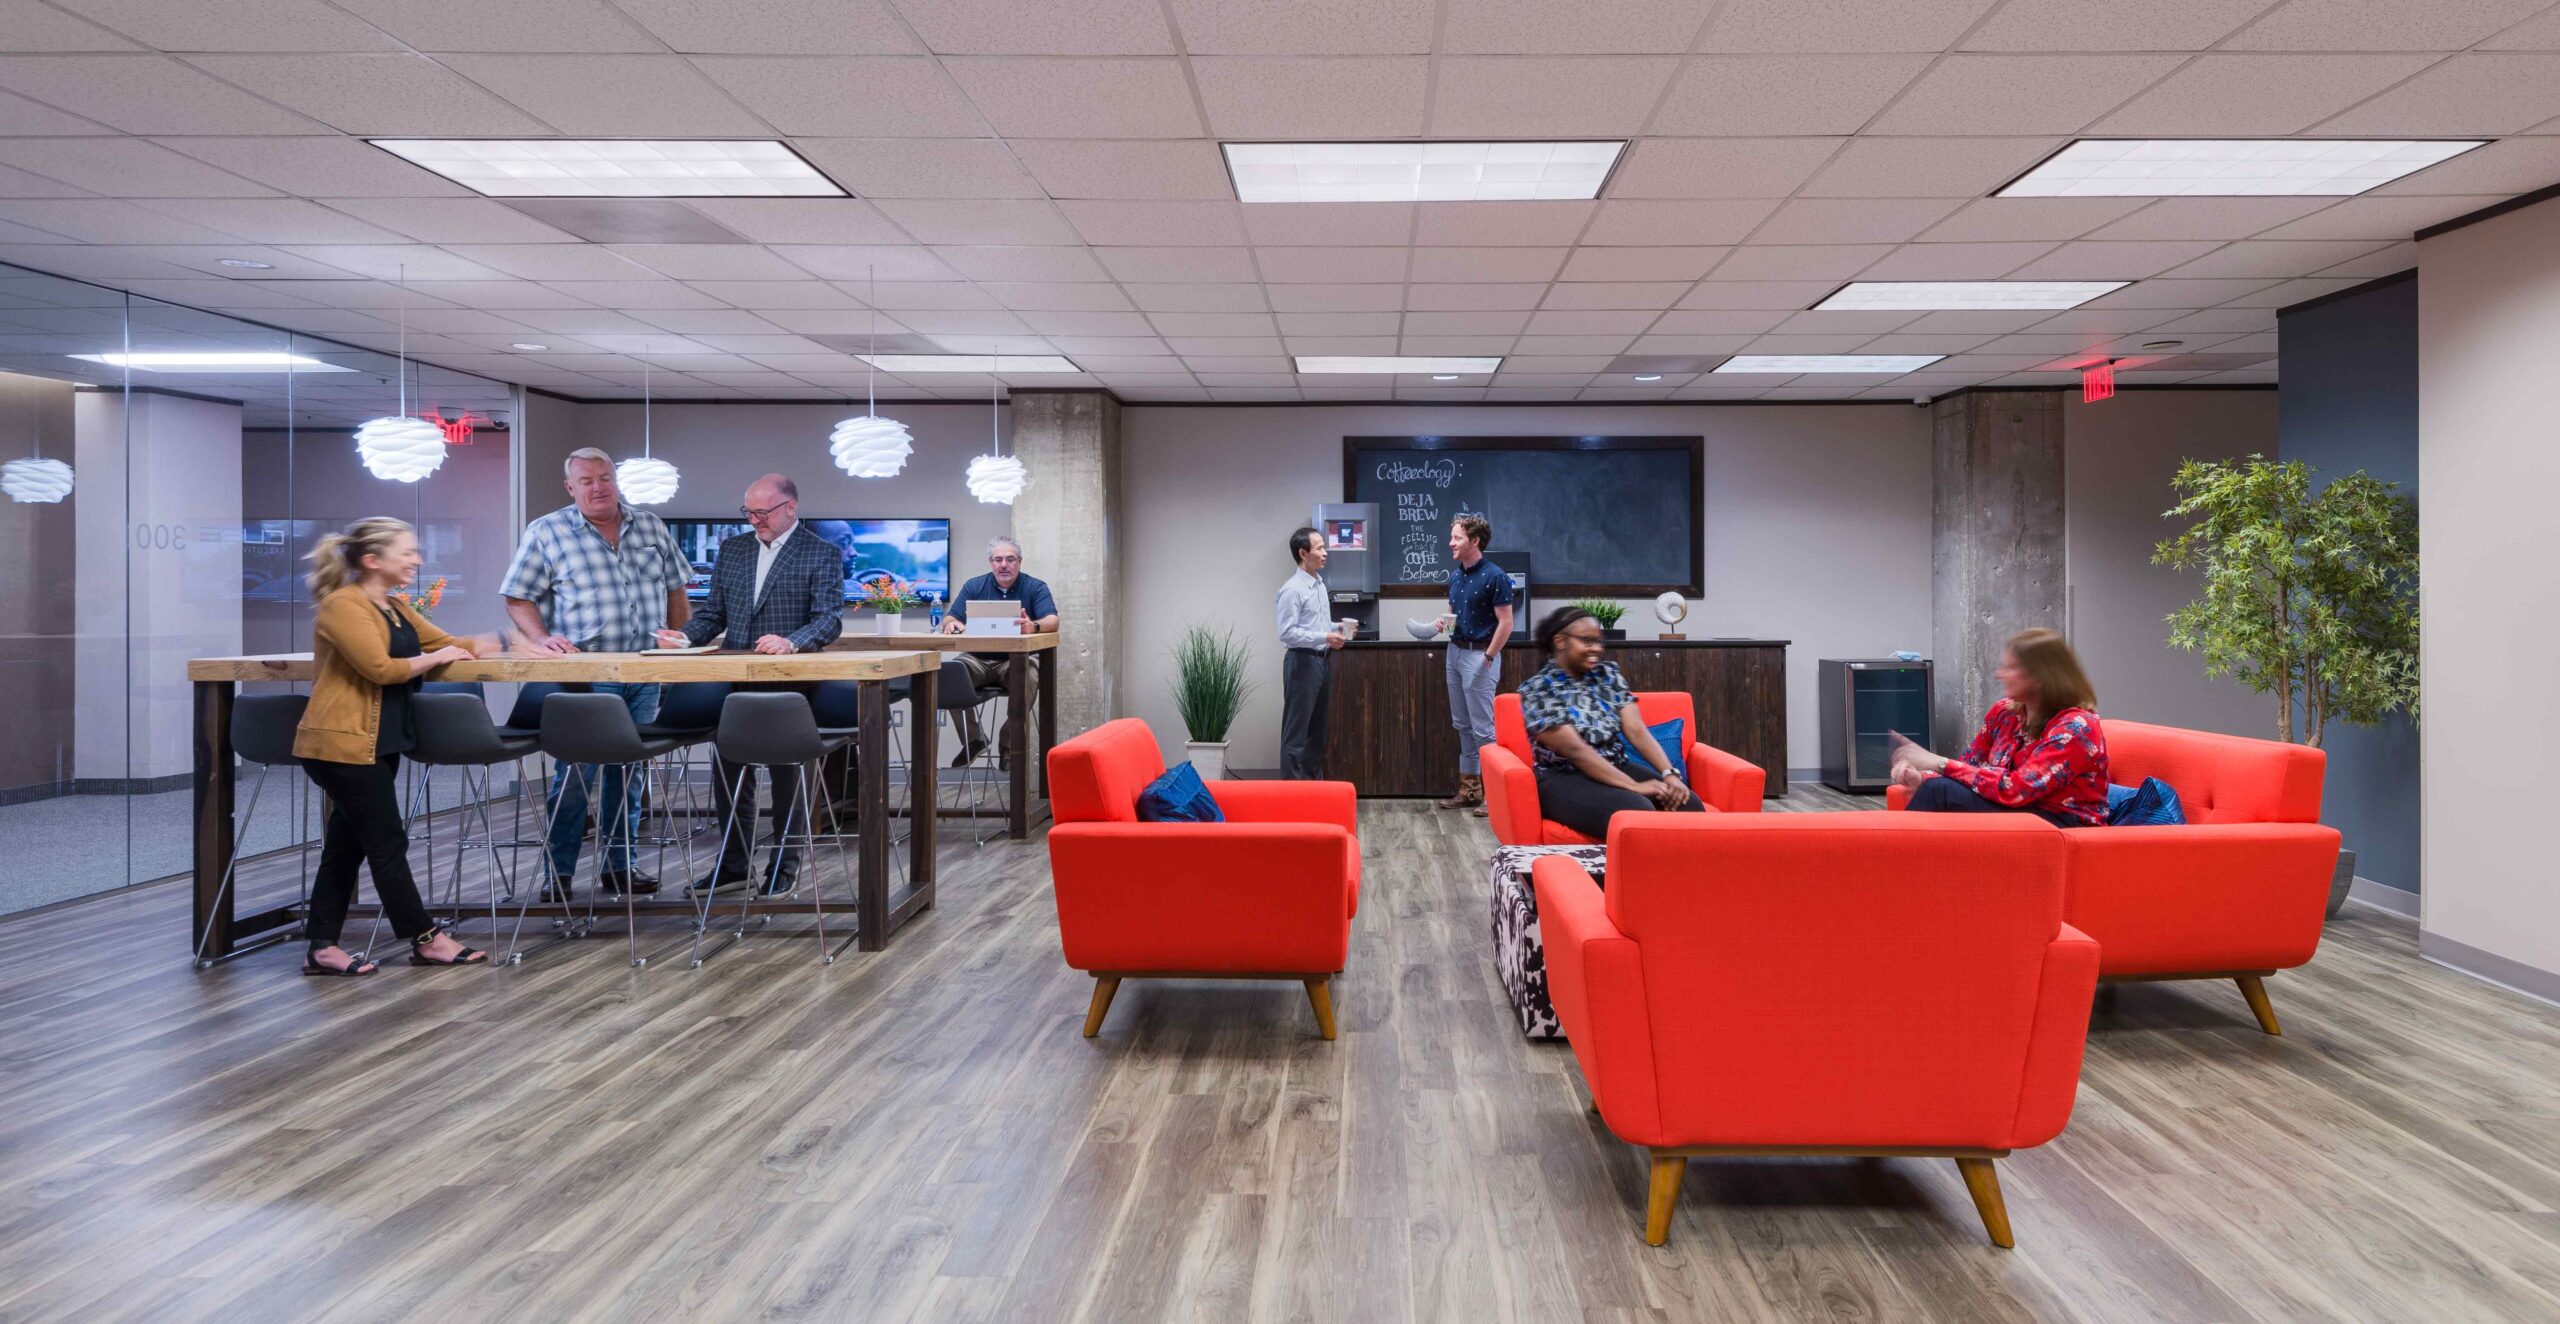 Coworking space North Dallas with 4 sofas and various shared desk spaces.